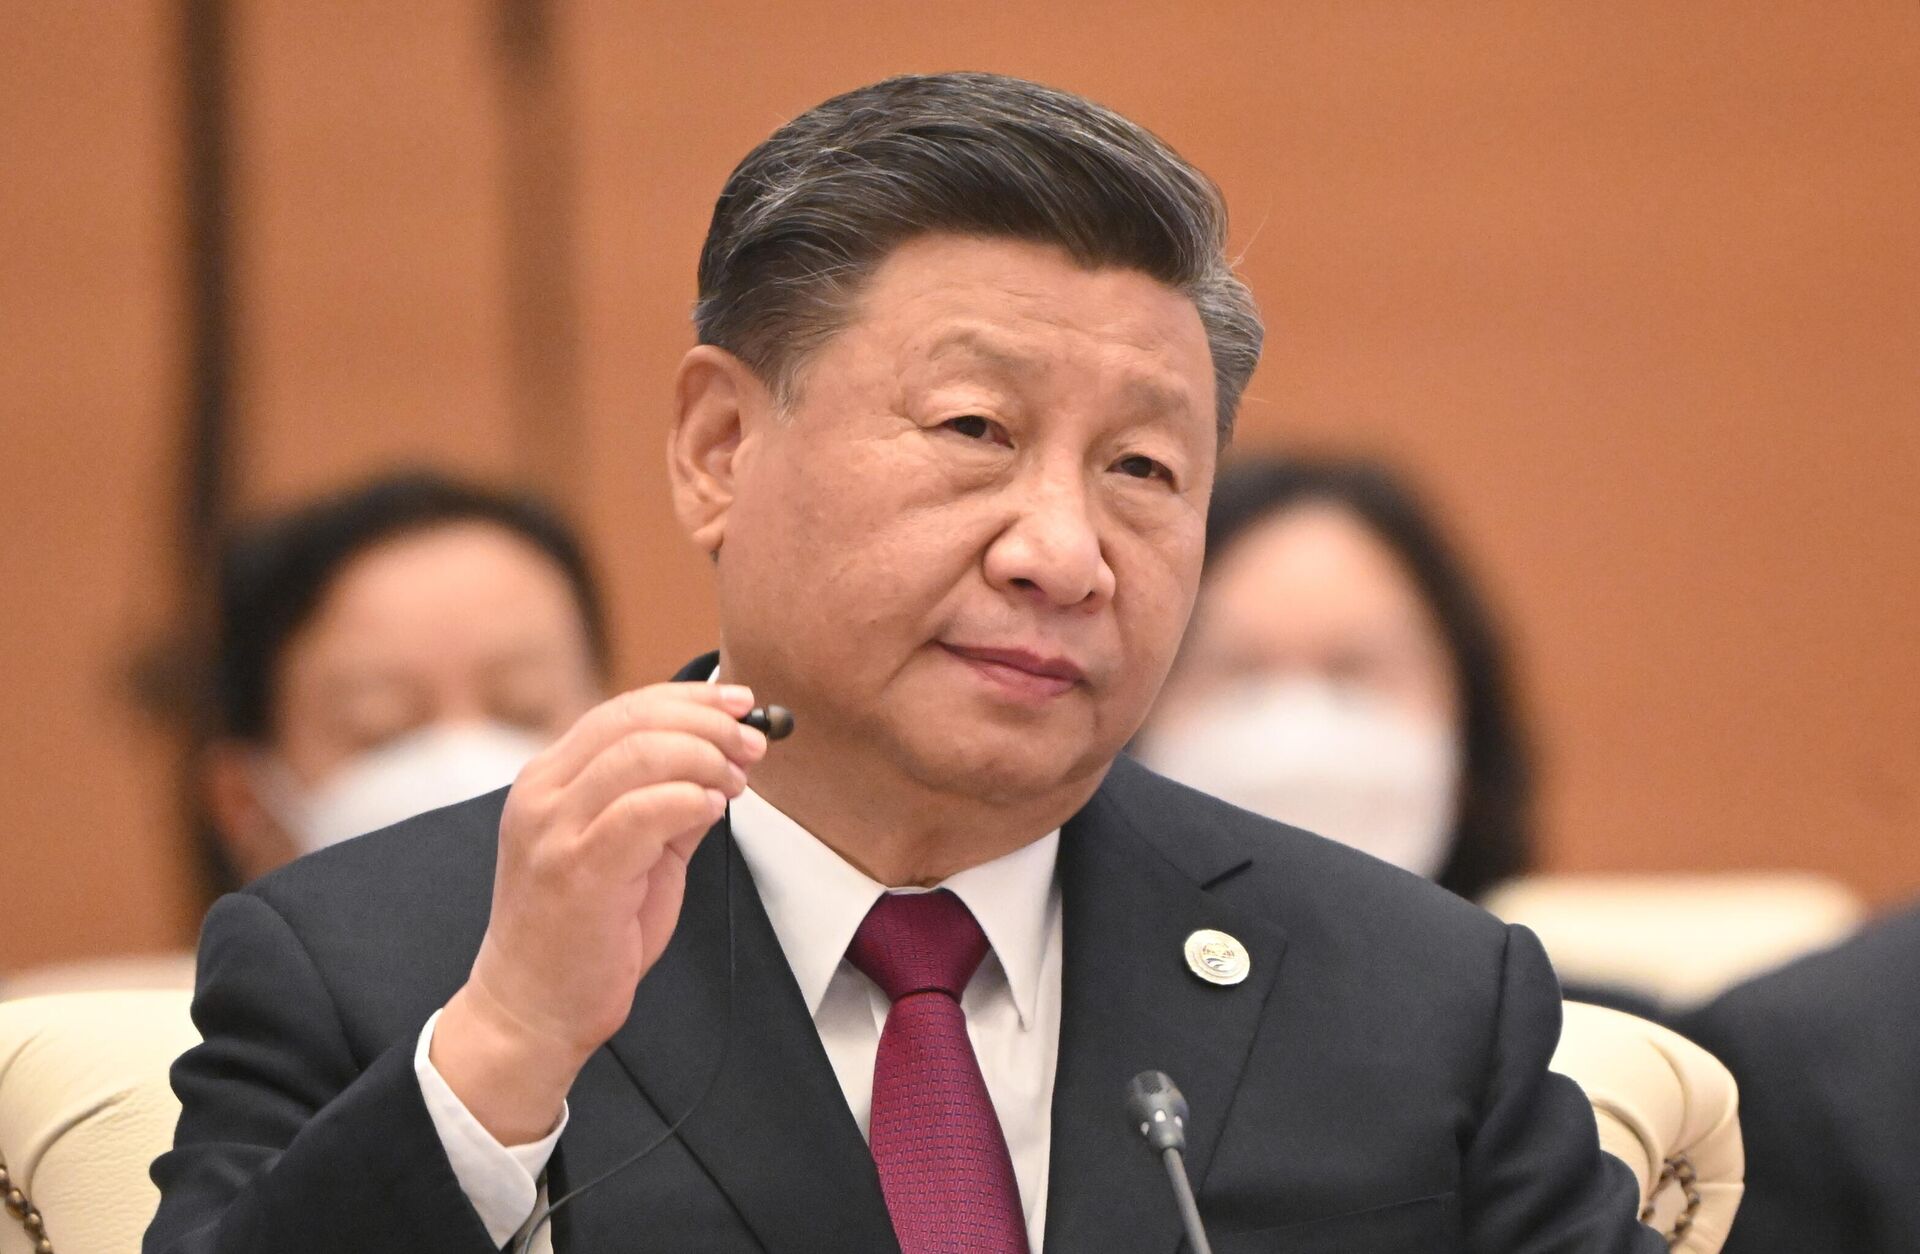 September 16, 2022. Chinese President Xi Jinping at an expanded meeting of the Shanghai Cooperation Organization (SCO) Council of Heads of State - Sputnik International, 1920, 15.10.2022